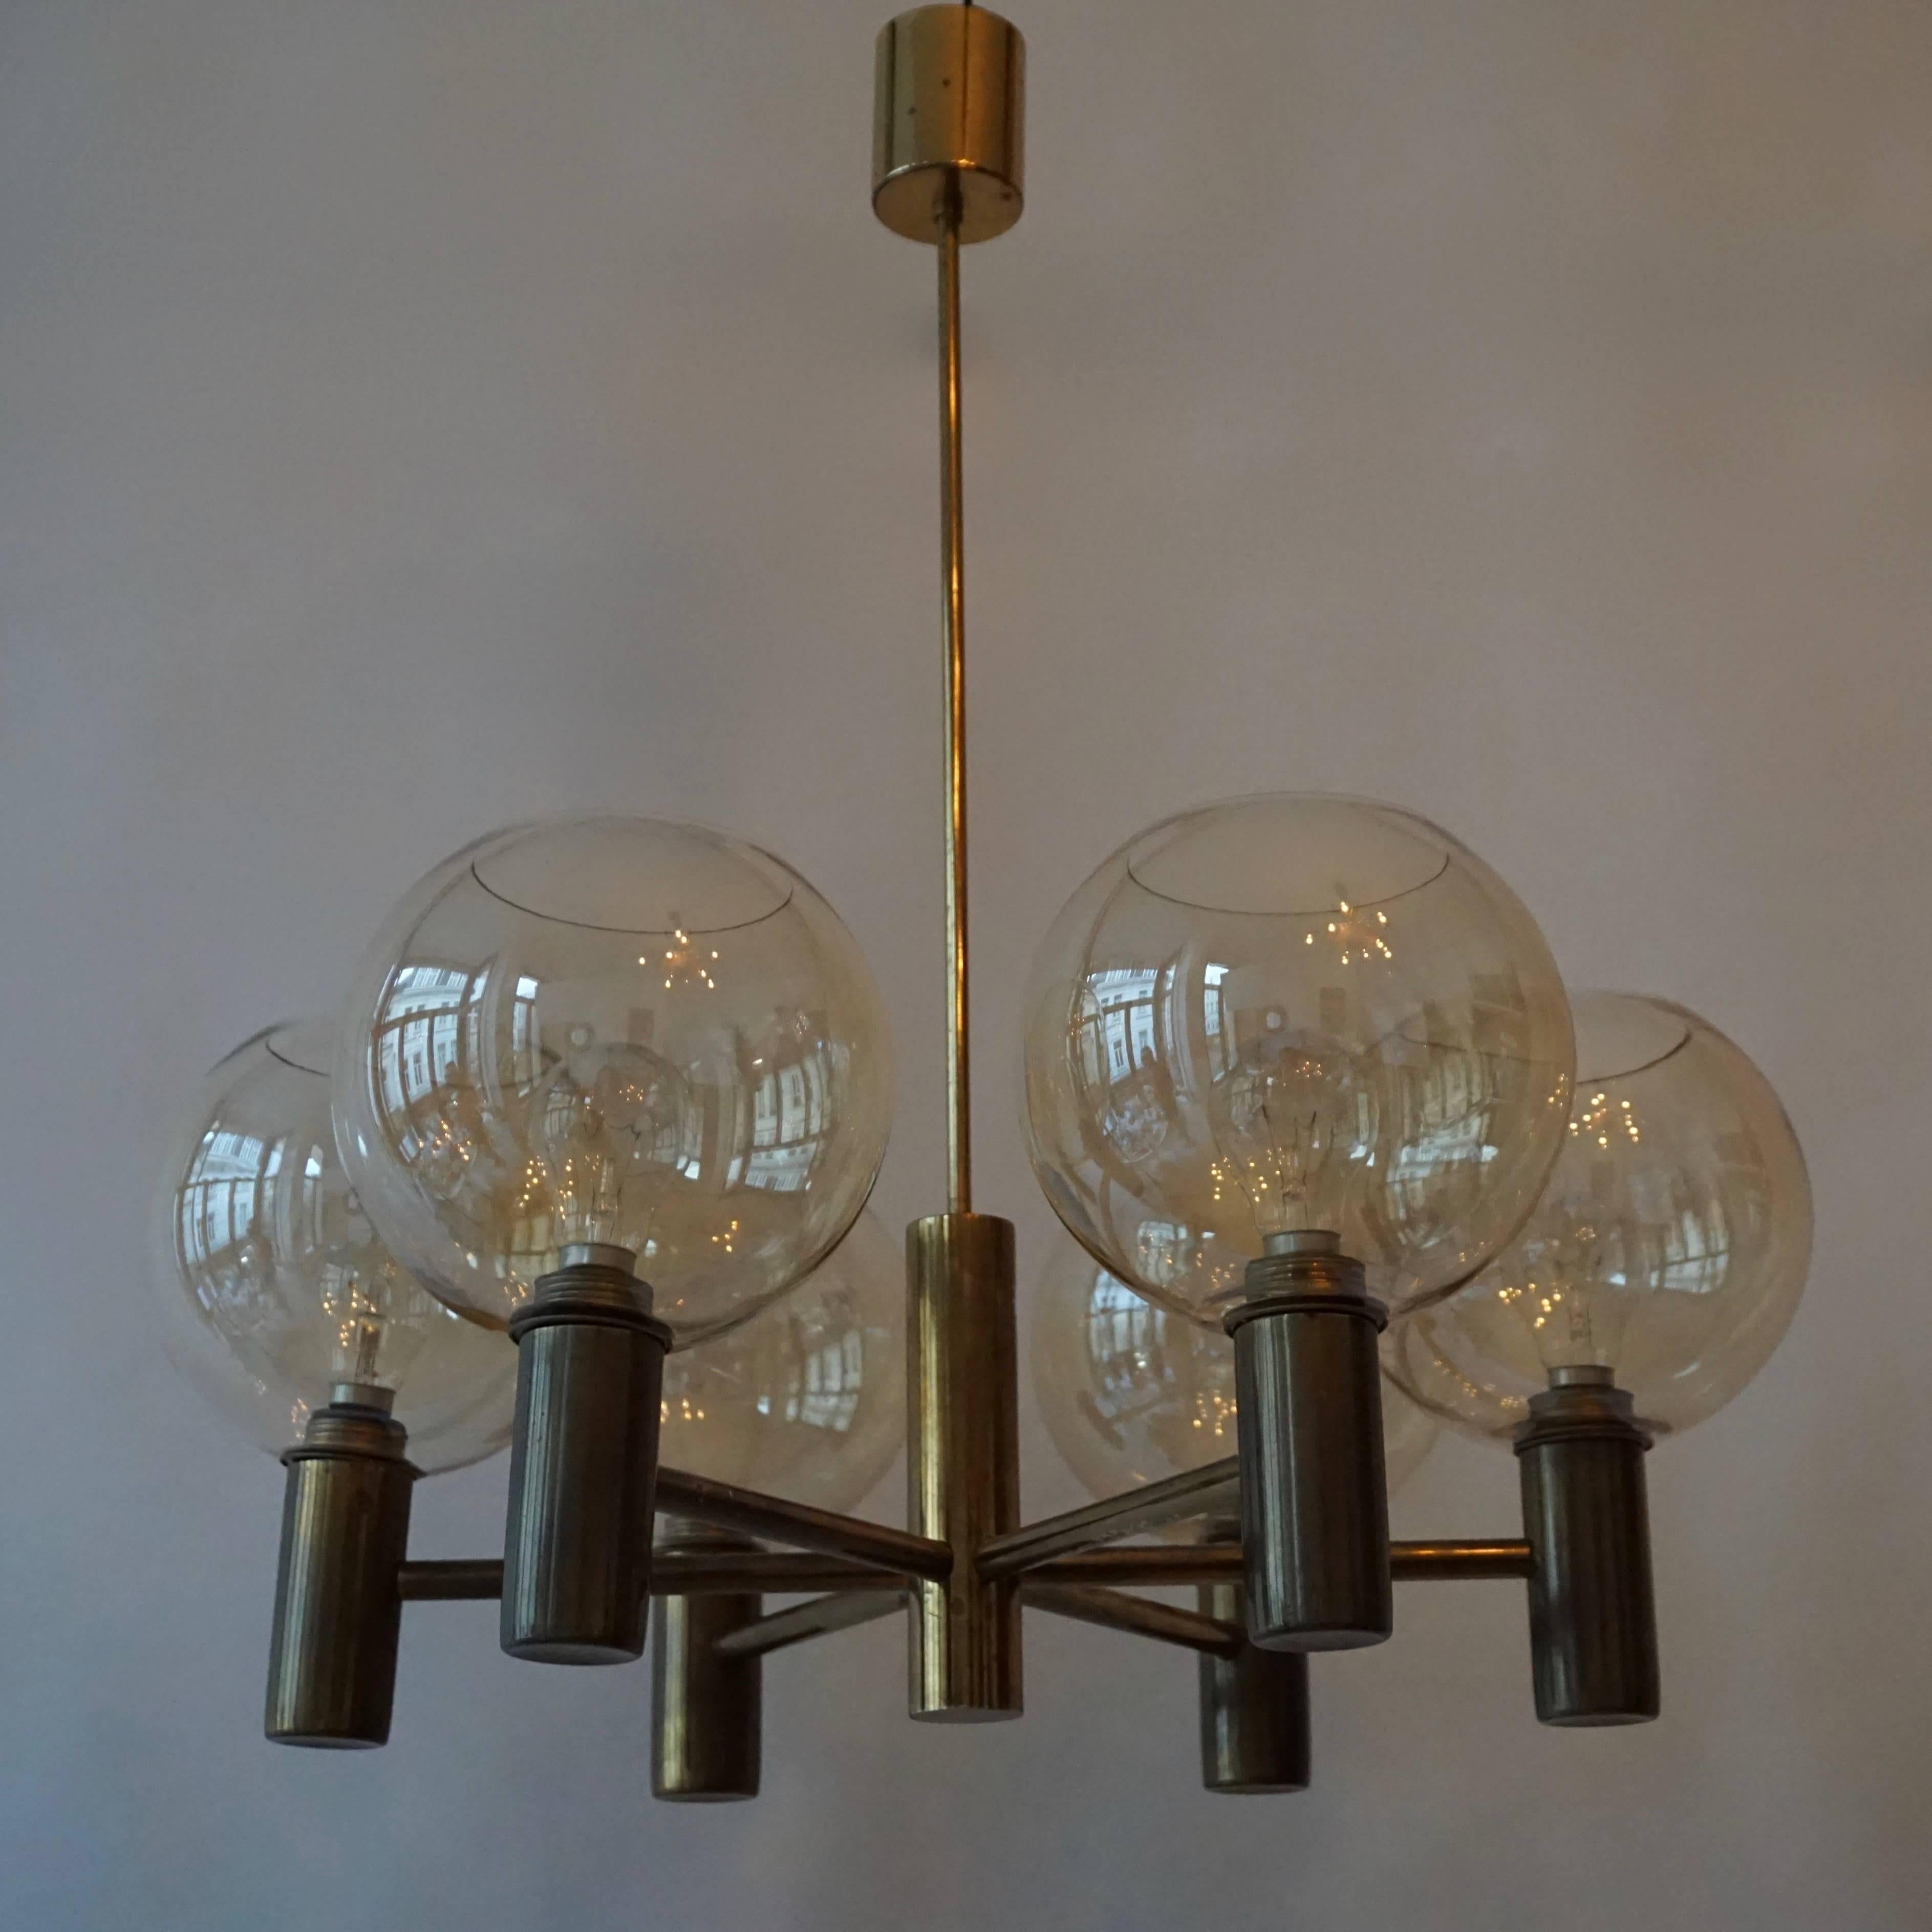 One Superb chandelier by Hans Agne Jakobsson.
Six arms, original smoke glass shades.
In working condition.
60 watts max per bulb.
A glass shade was broken from 1 chandelier.
So there is only 1 chandelier available for sale.